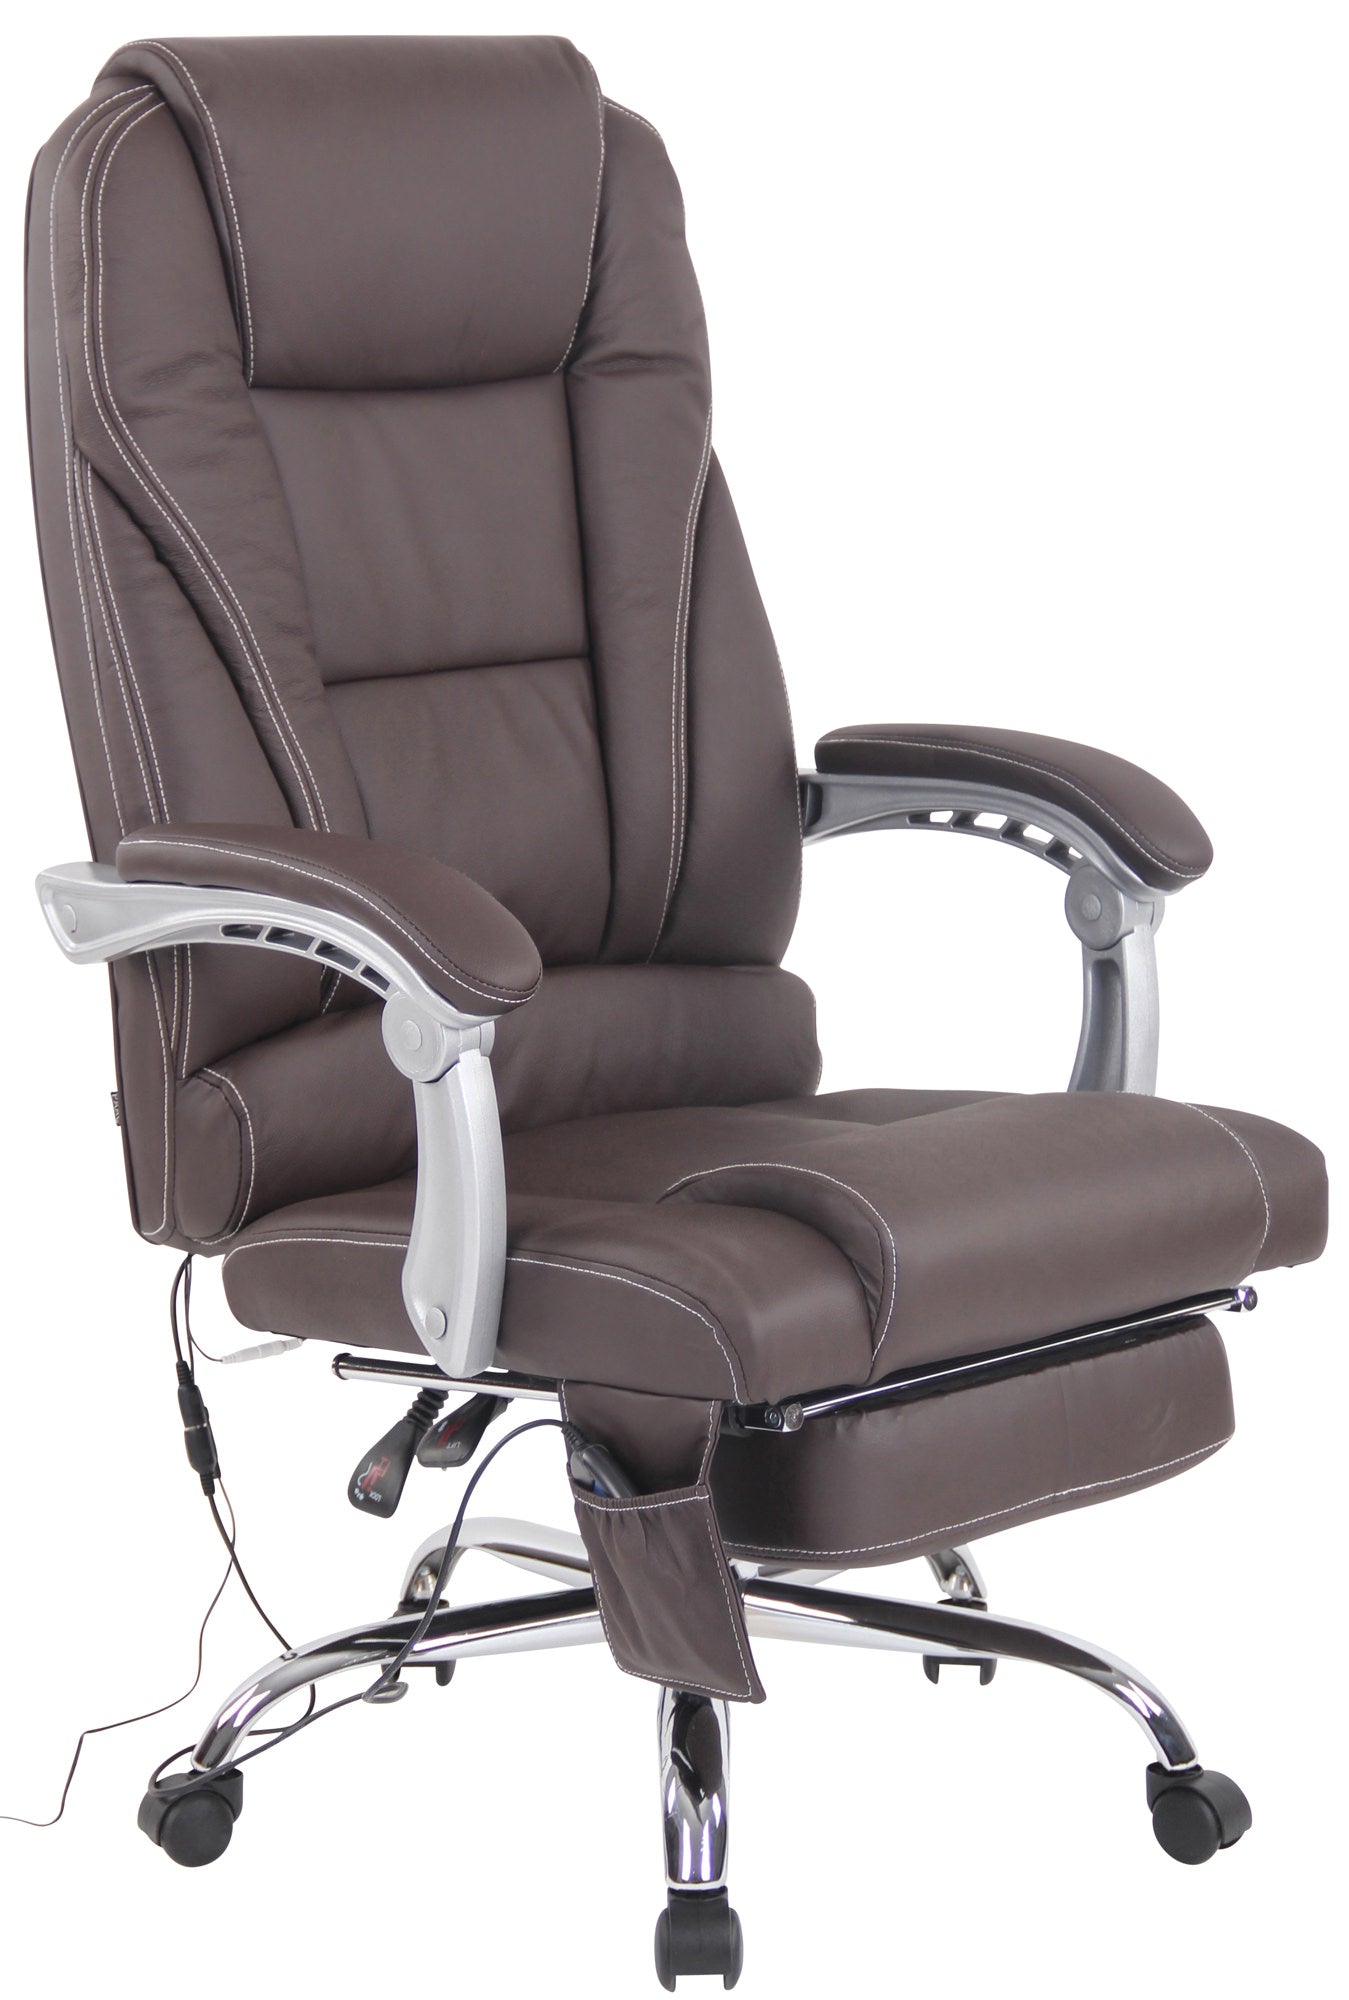 bureaustoel_pacific_real_leather_with_massage_function_317767